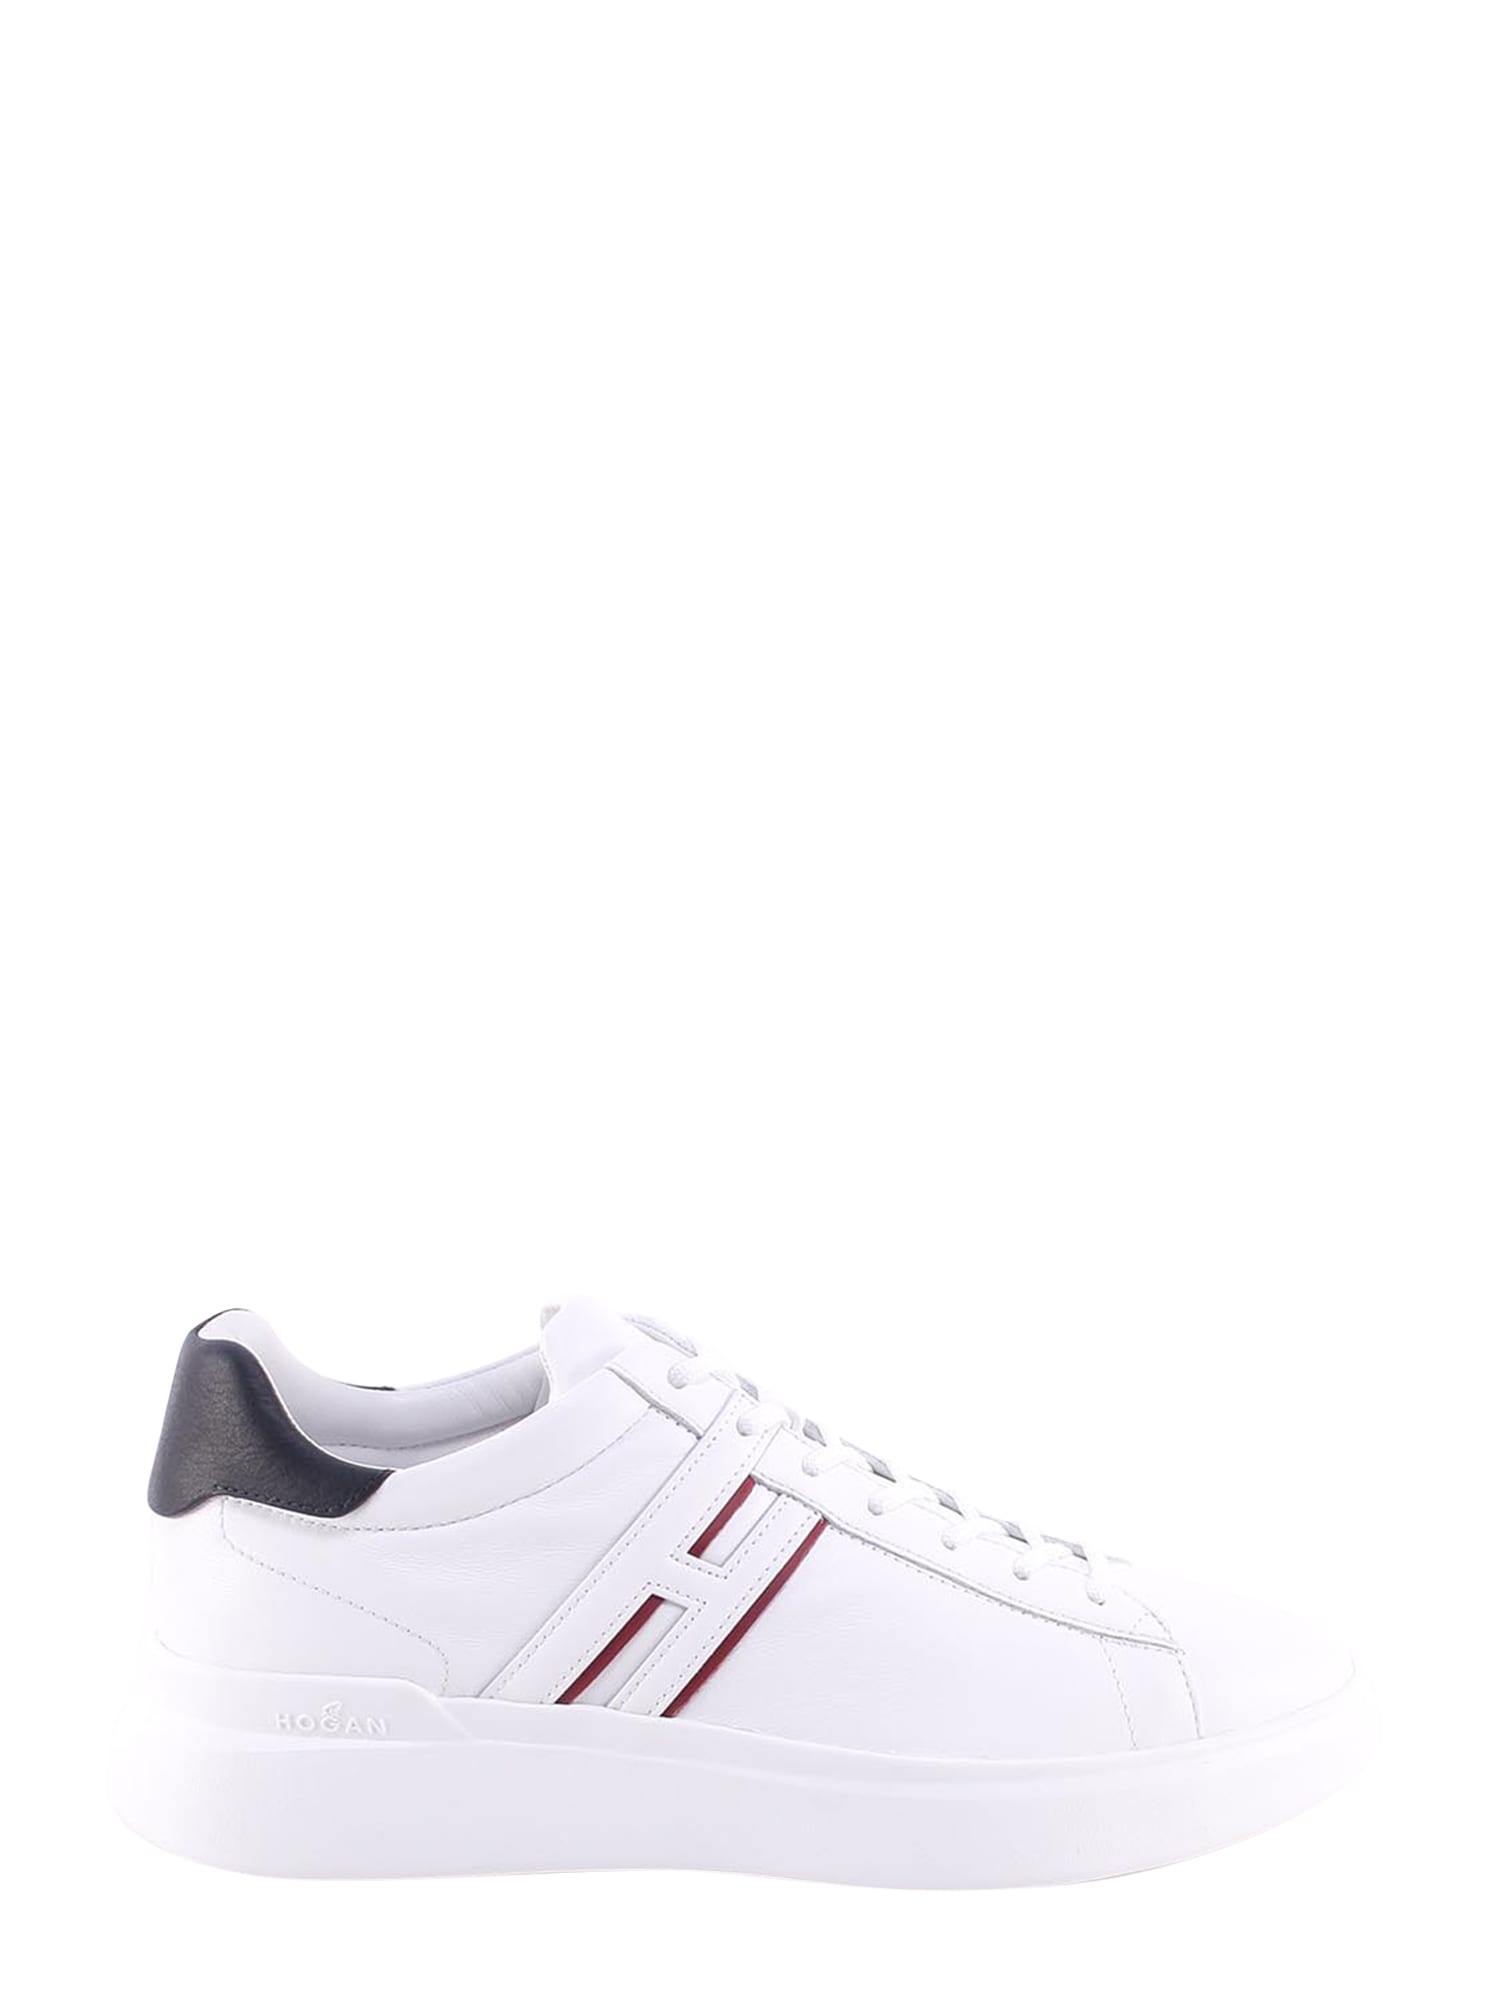 Hogan H580 Trainers In White